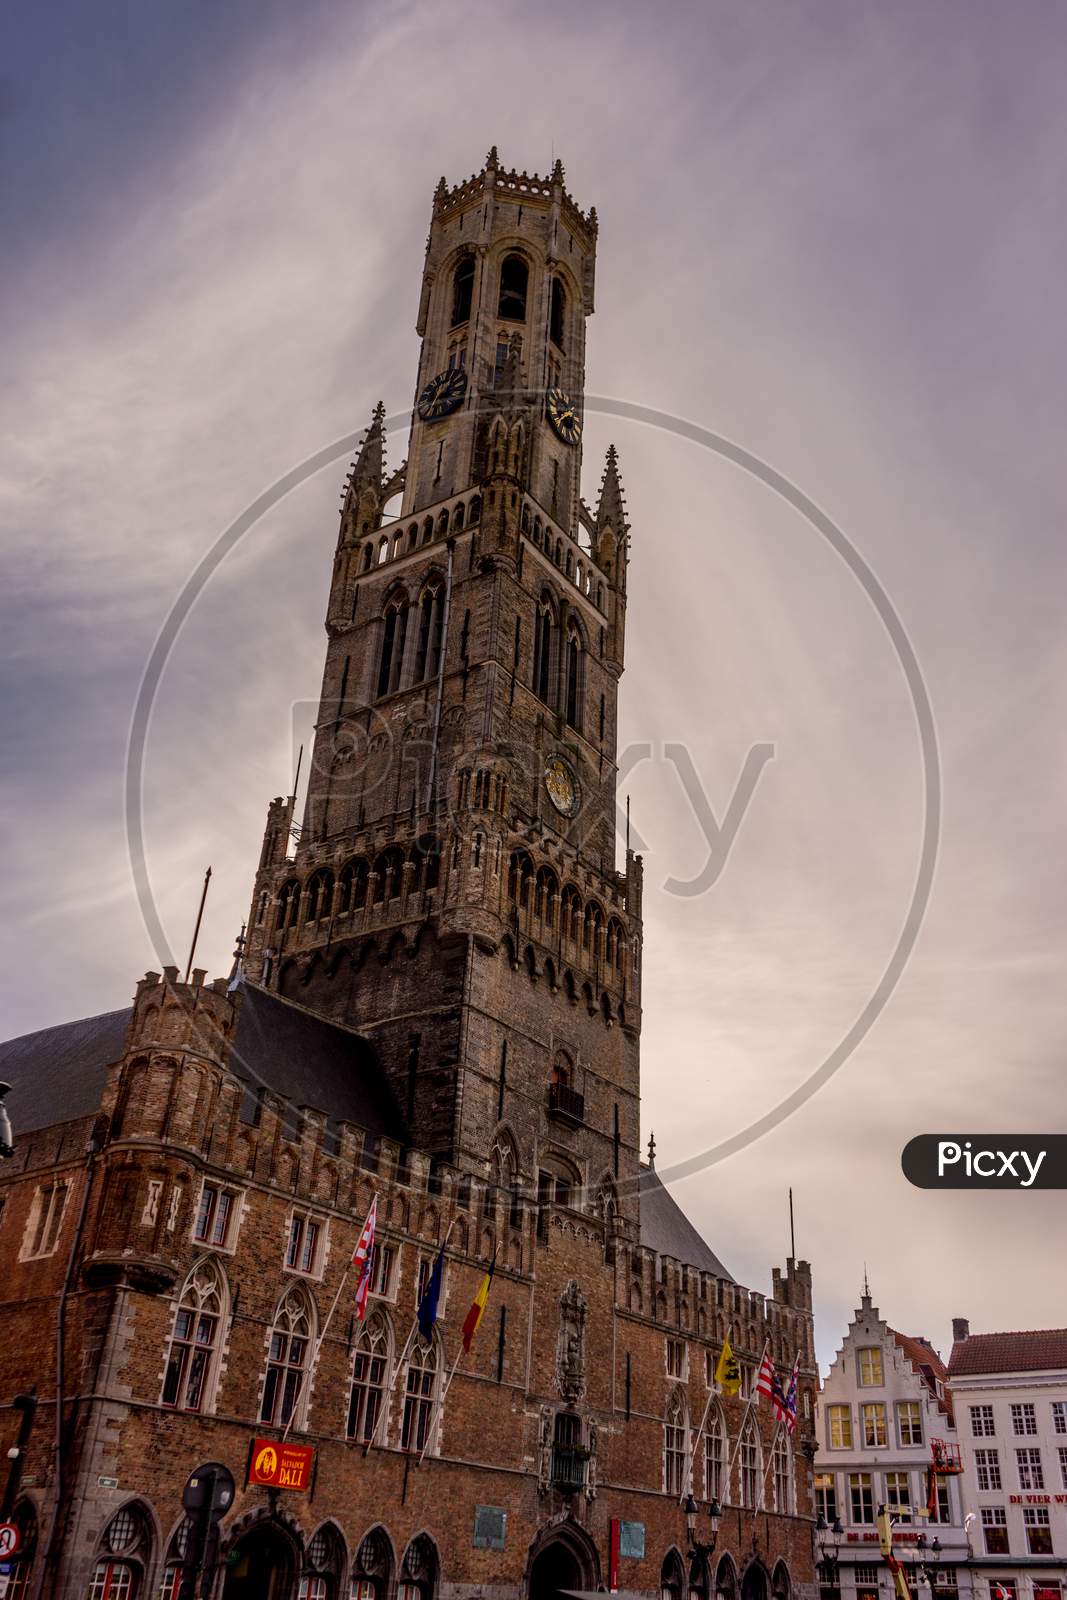 Bruges, Belgium - 17 February 2018: Belfry Of Bruges, A Group Of People Walking In Front Of A Clock Tower With Belfry Of Bruges In The Background